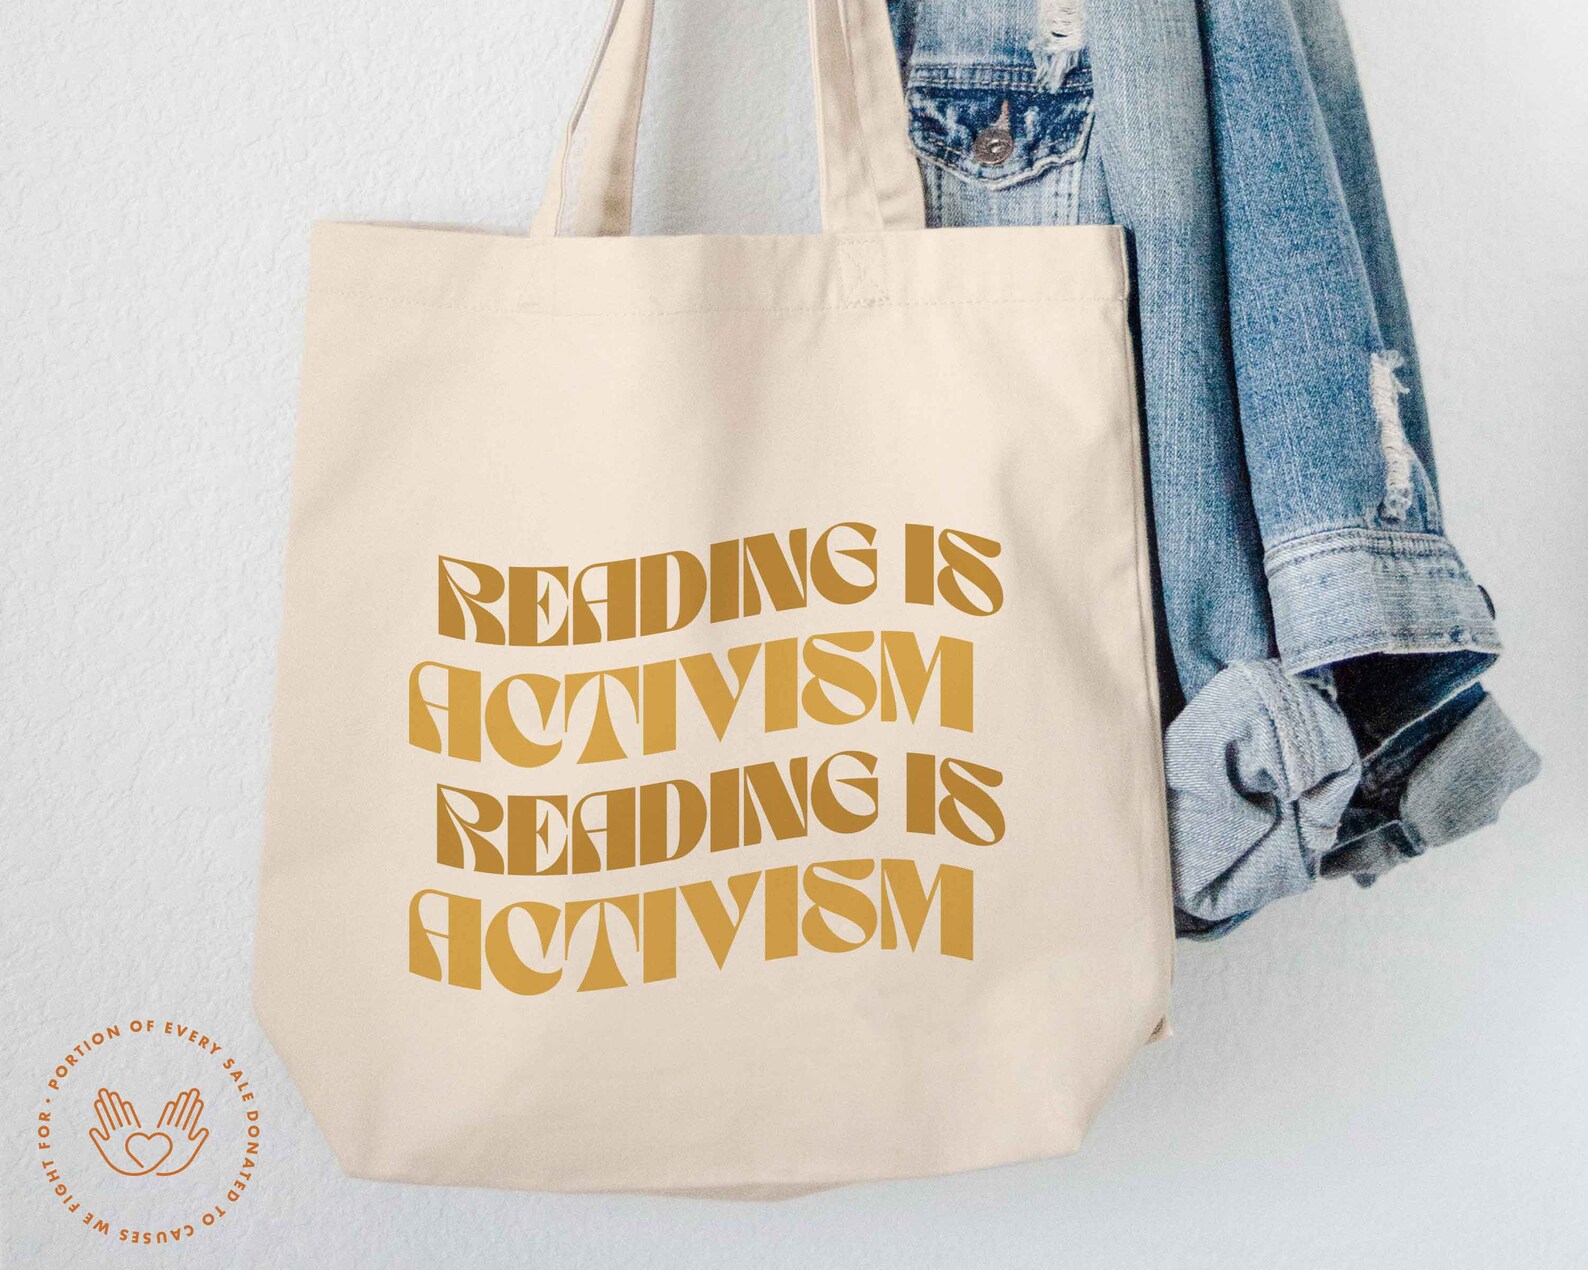 tote bag with vintage style font that says "reading is activism."